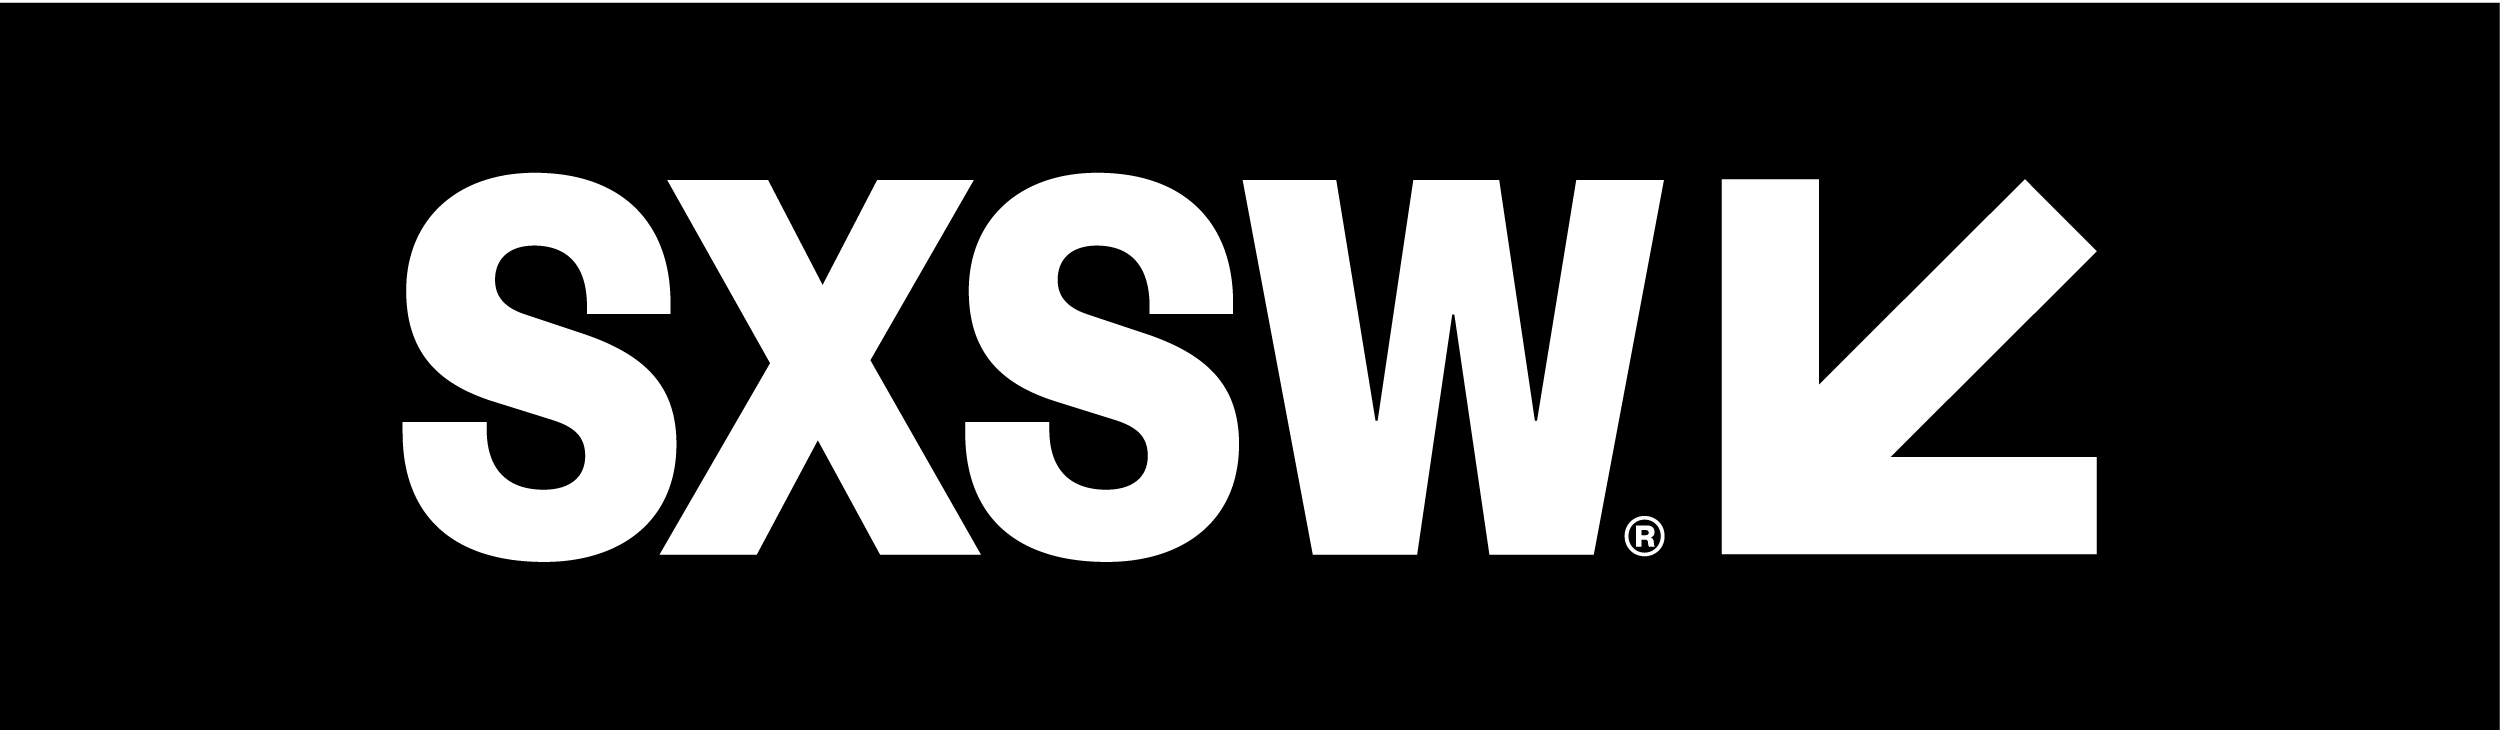 SXSW MUSIC FESTIVAL 1,400 Showcasing Artists Performing on 79 Stages